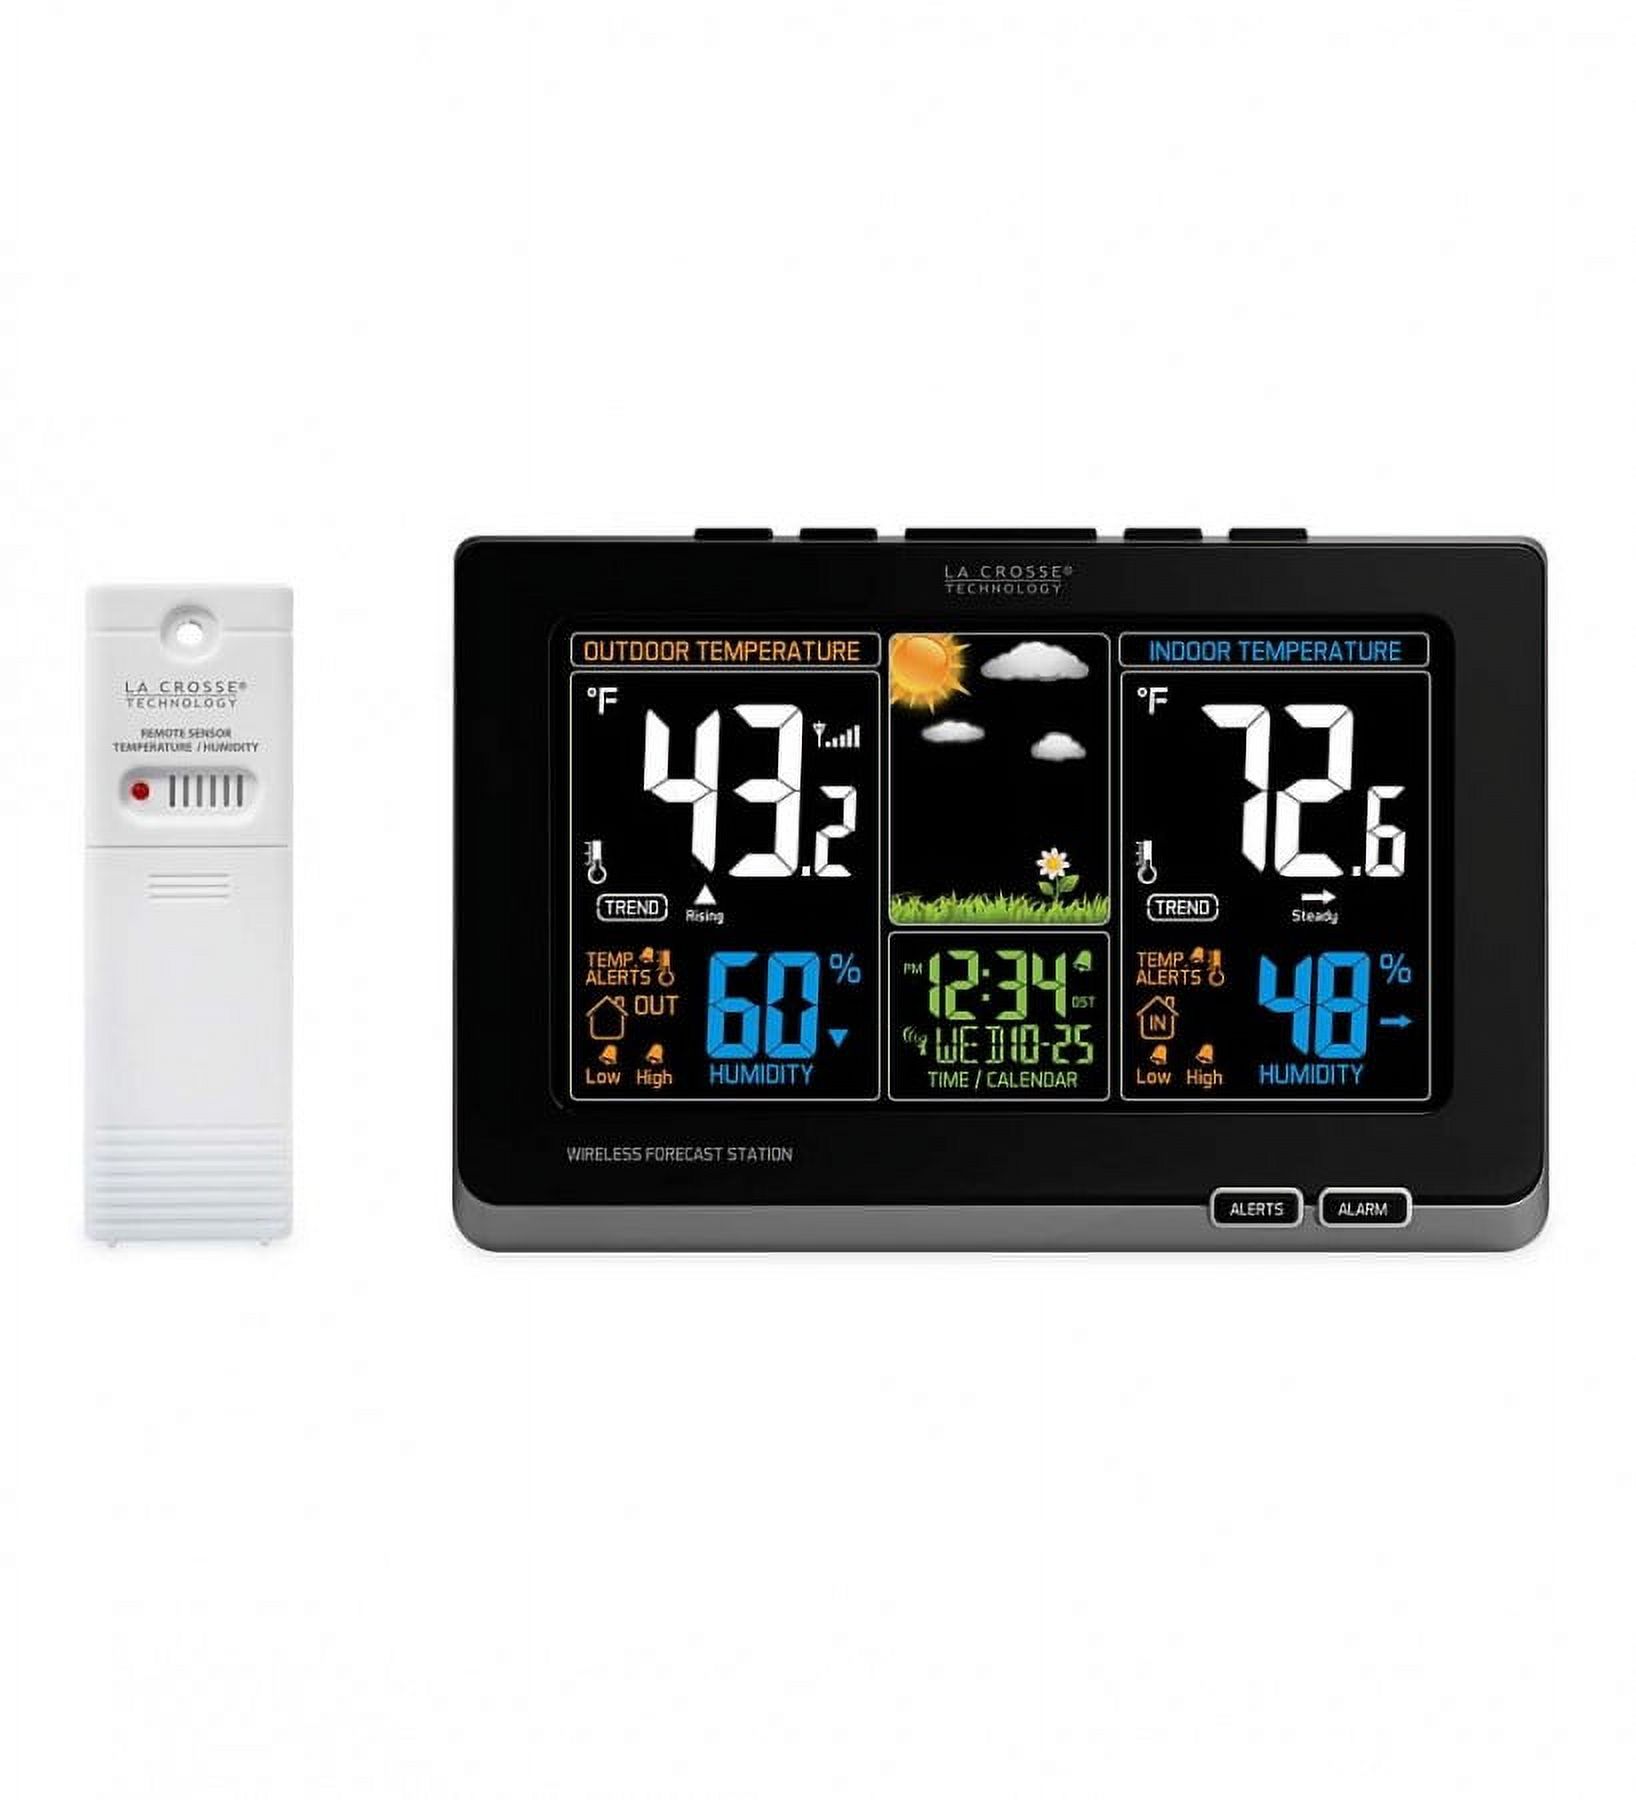 La Crosse Technology 308-1414B Wireless Atomic Digital Color Weather Station with Alerts - image 1 of 1